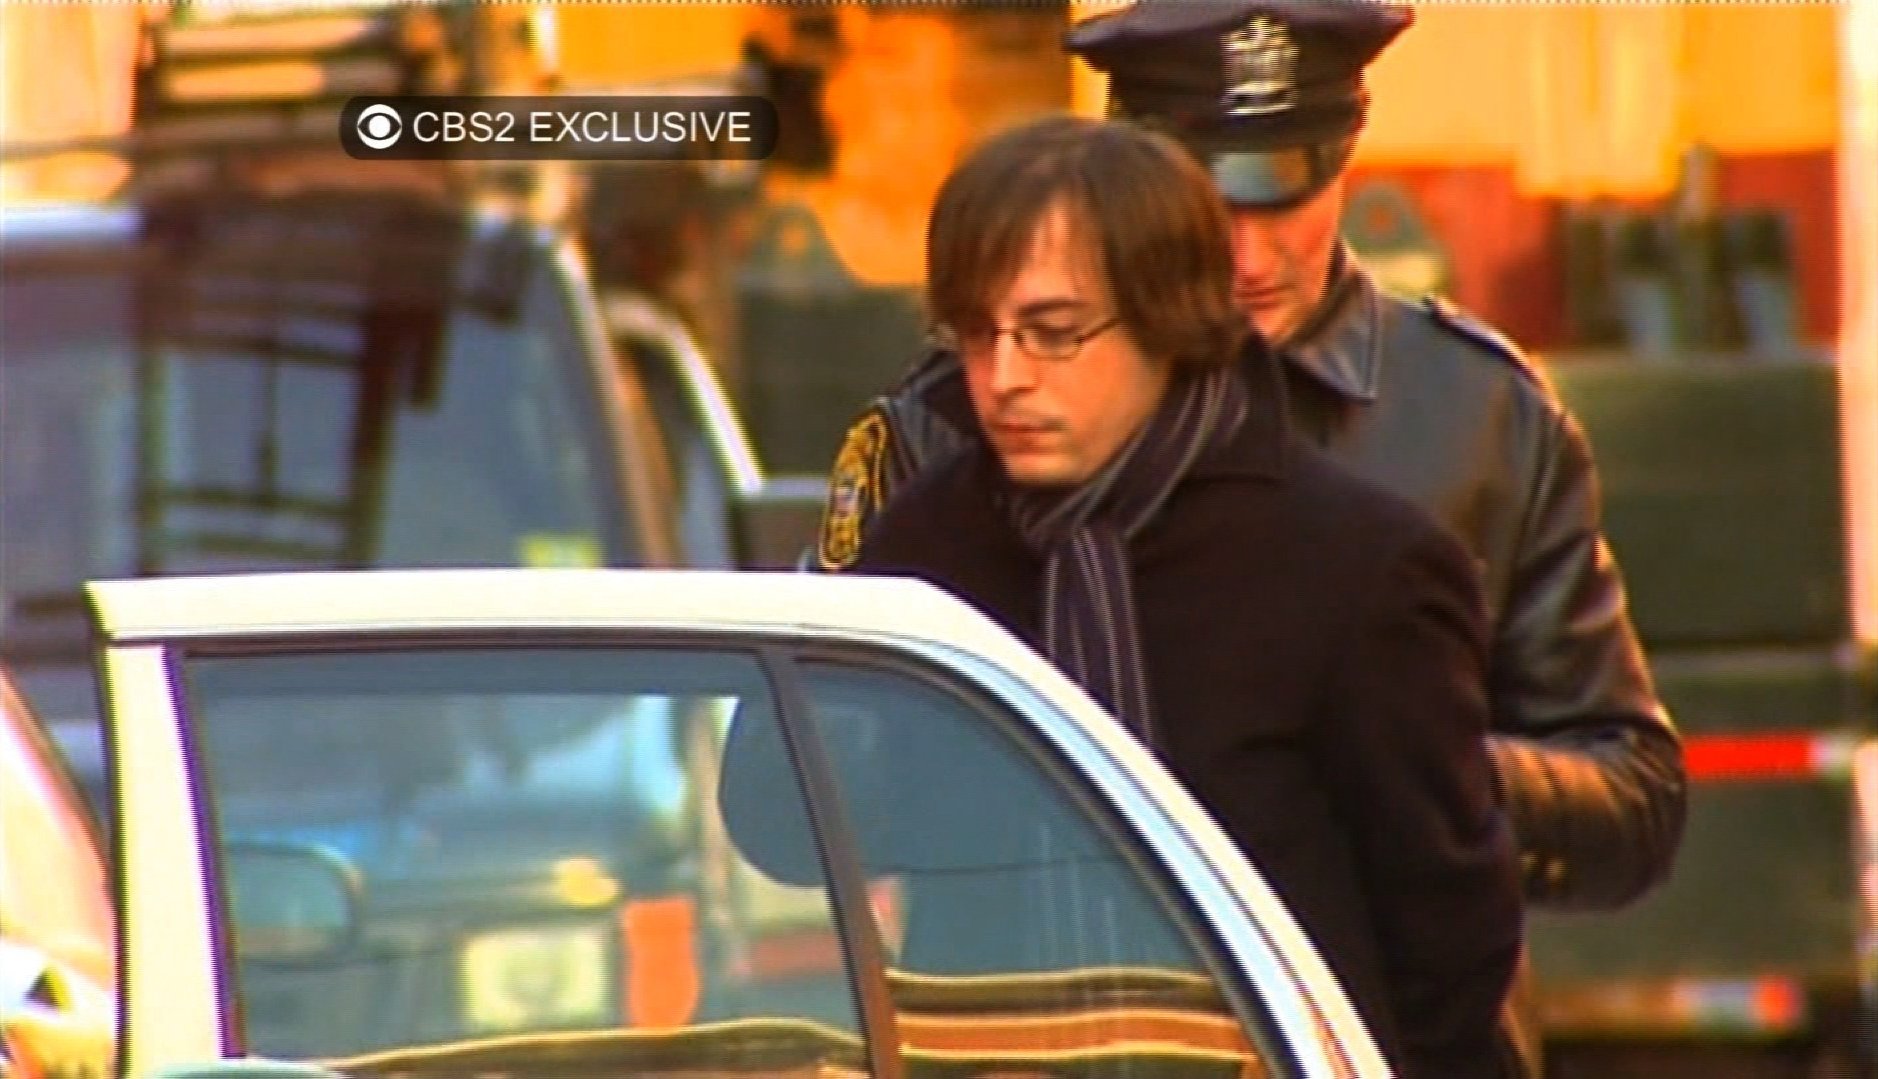 Ryan Lanz was taken into custody for questioning after his brother, Adam Lanza, shot and killed 26 people at an elementary school in Newtown, Connecticut (Photo: CNN).